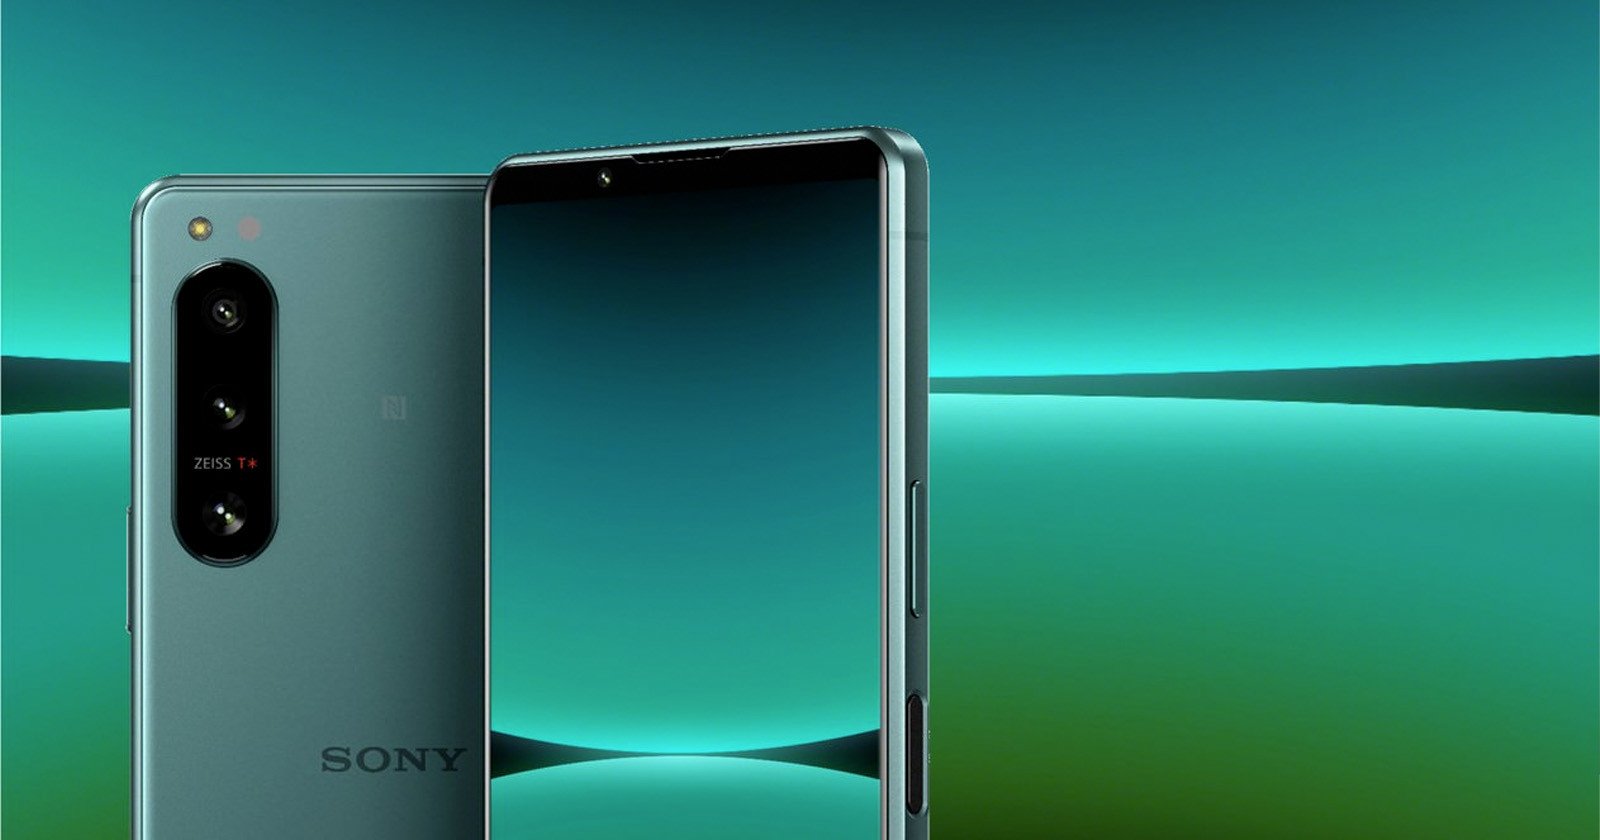 Sonys Xperia 5 IV is a Compact Phone with Flagship Features